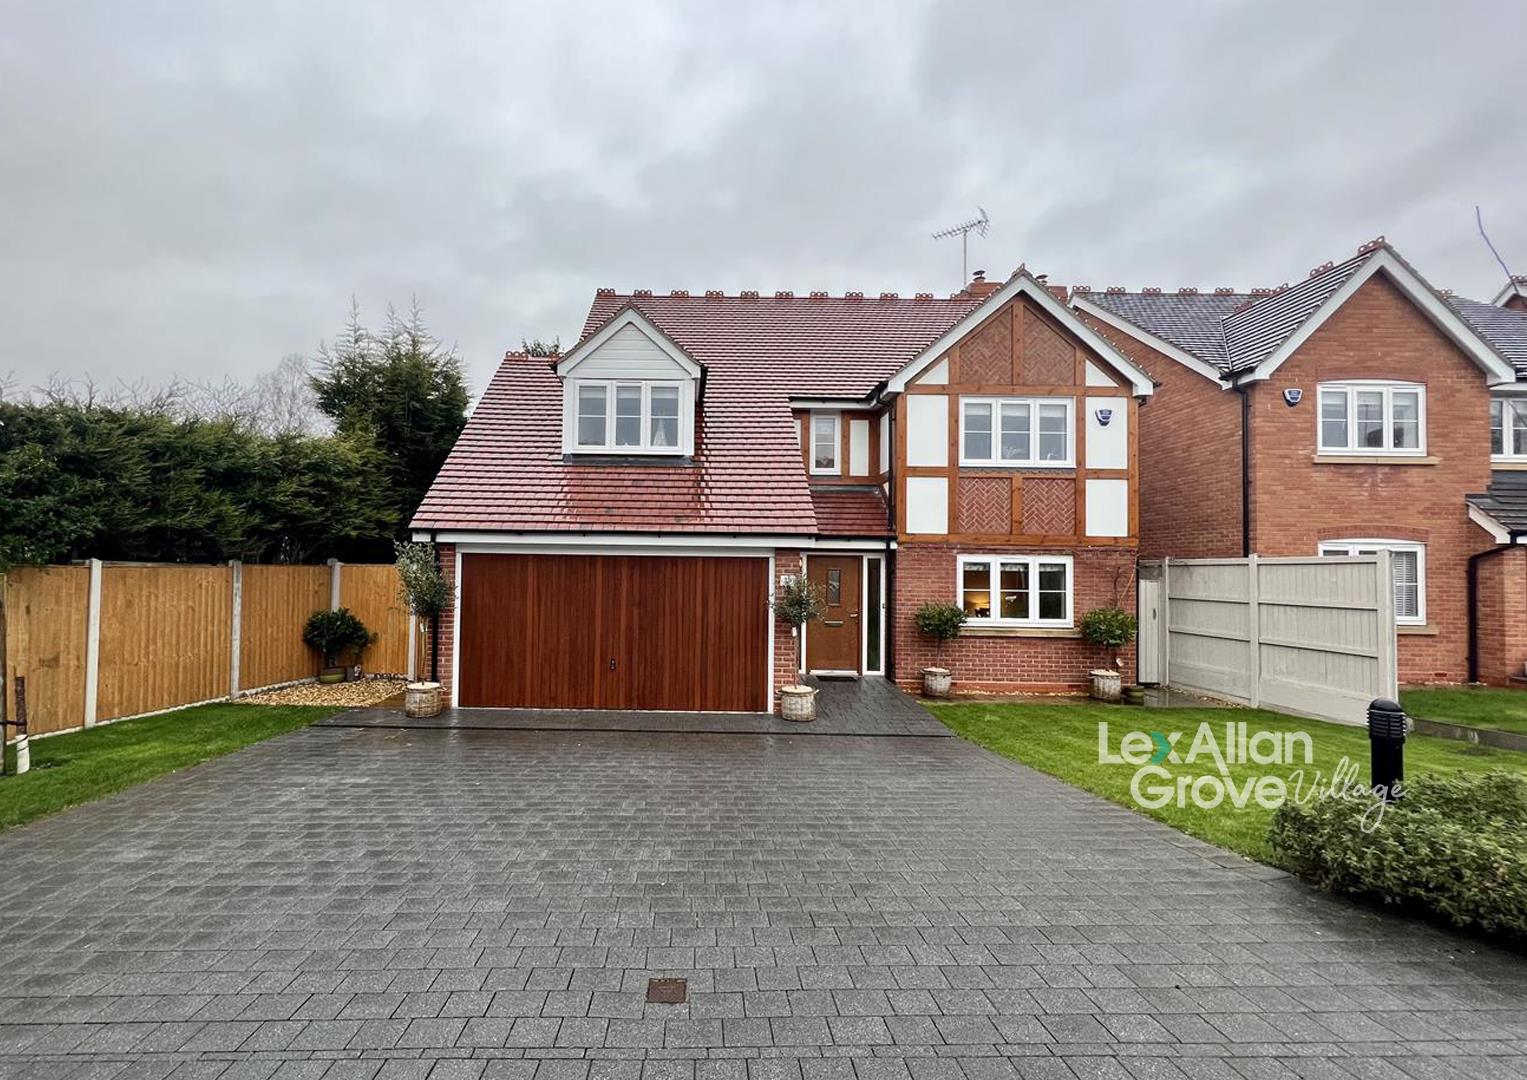 4 bed detached house for sale in Pearmain Gardens, Stourbridge, DY9 